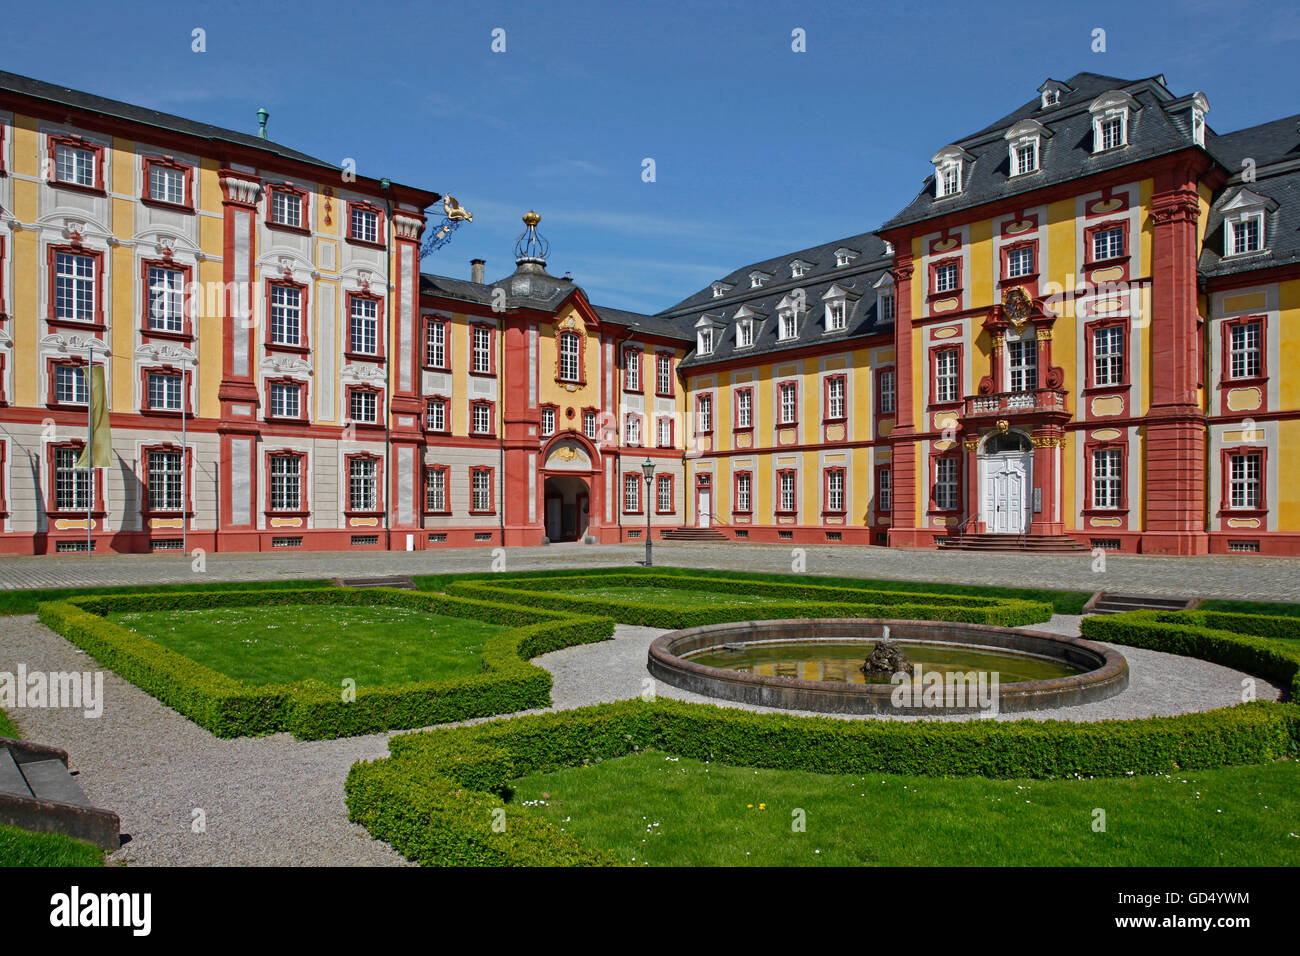 Bruchsal Palace, de style baroque, 18e siècle, Bruchsal, Baden-Wurttemberg, Allemagne Banque D'Images